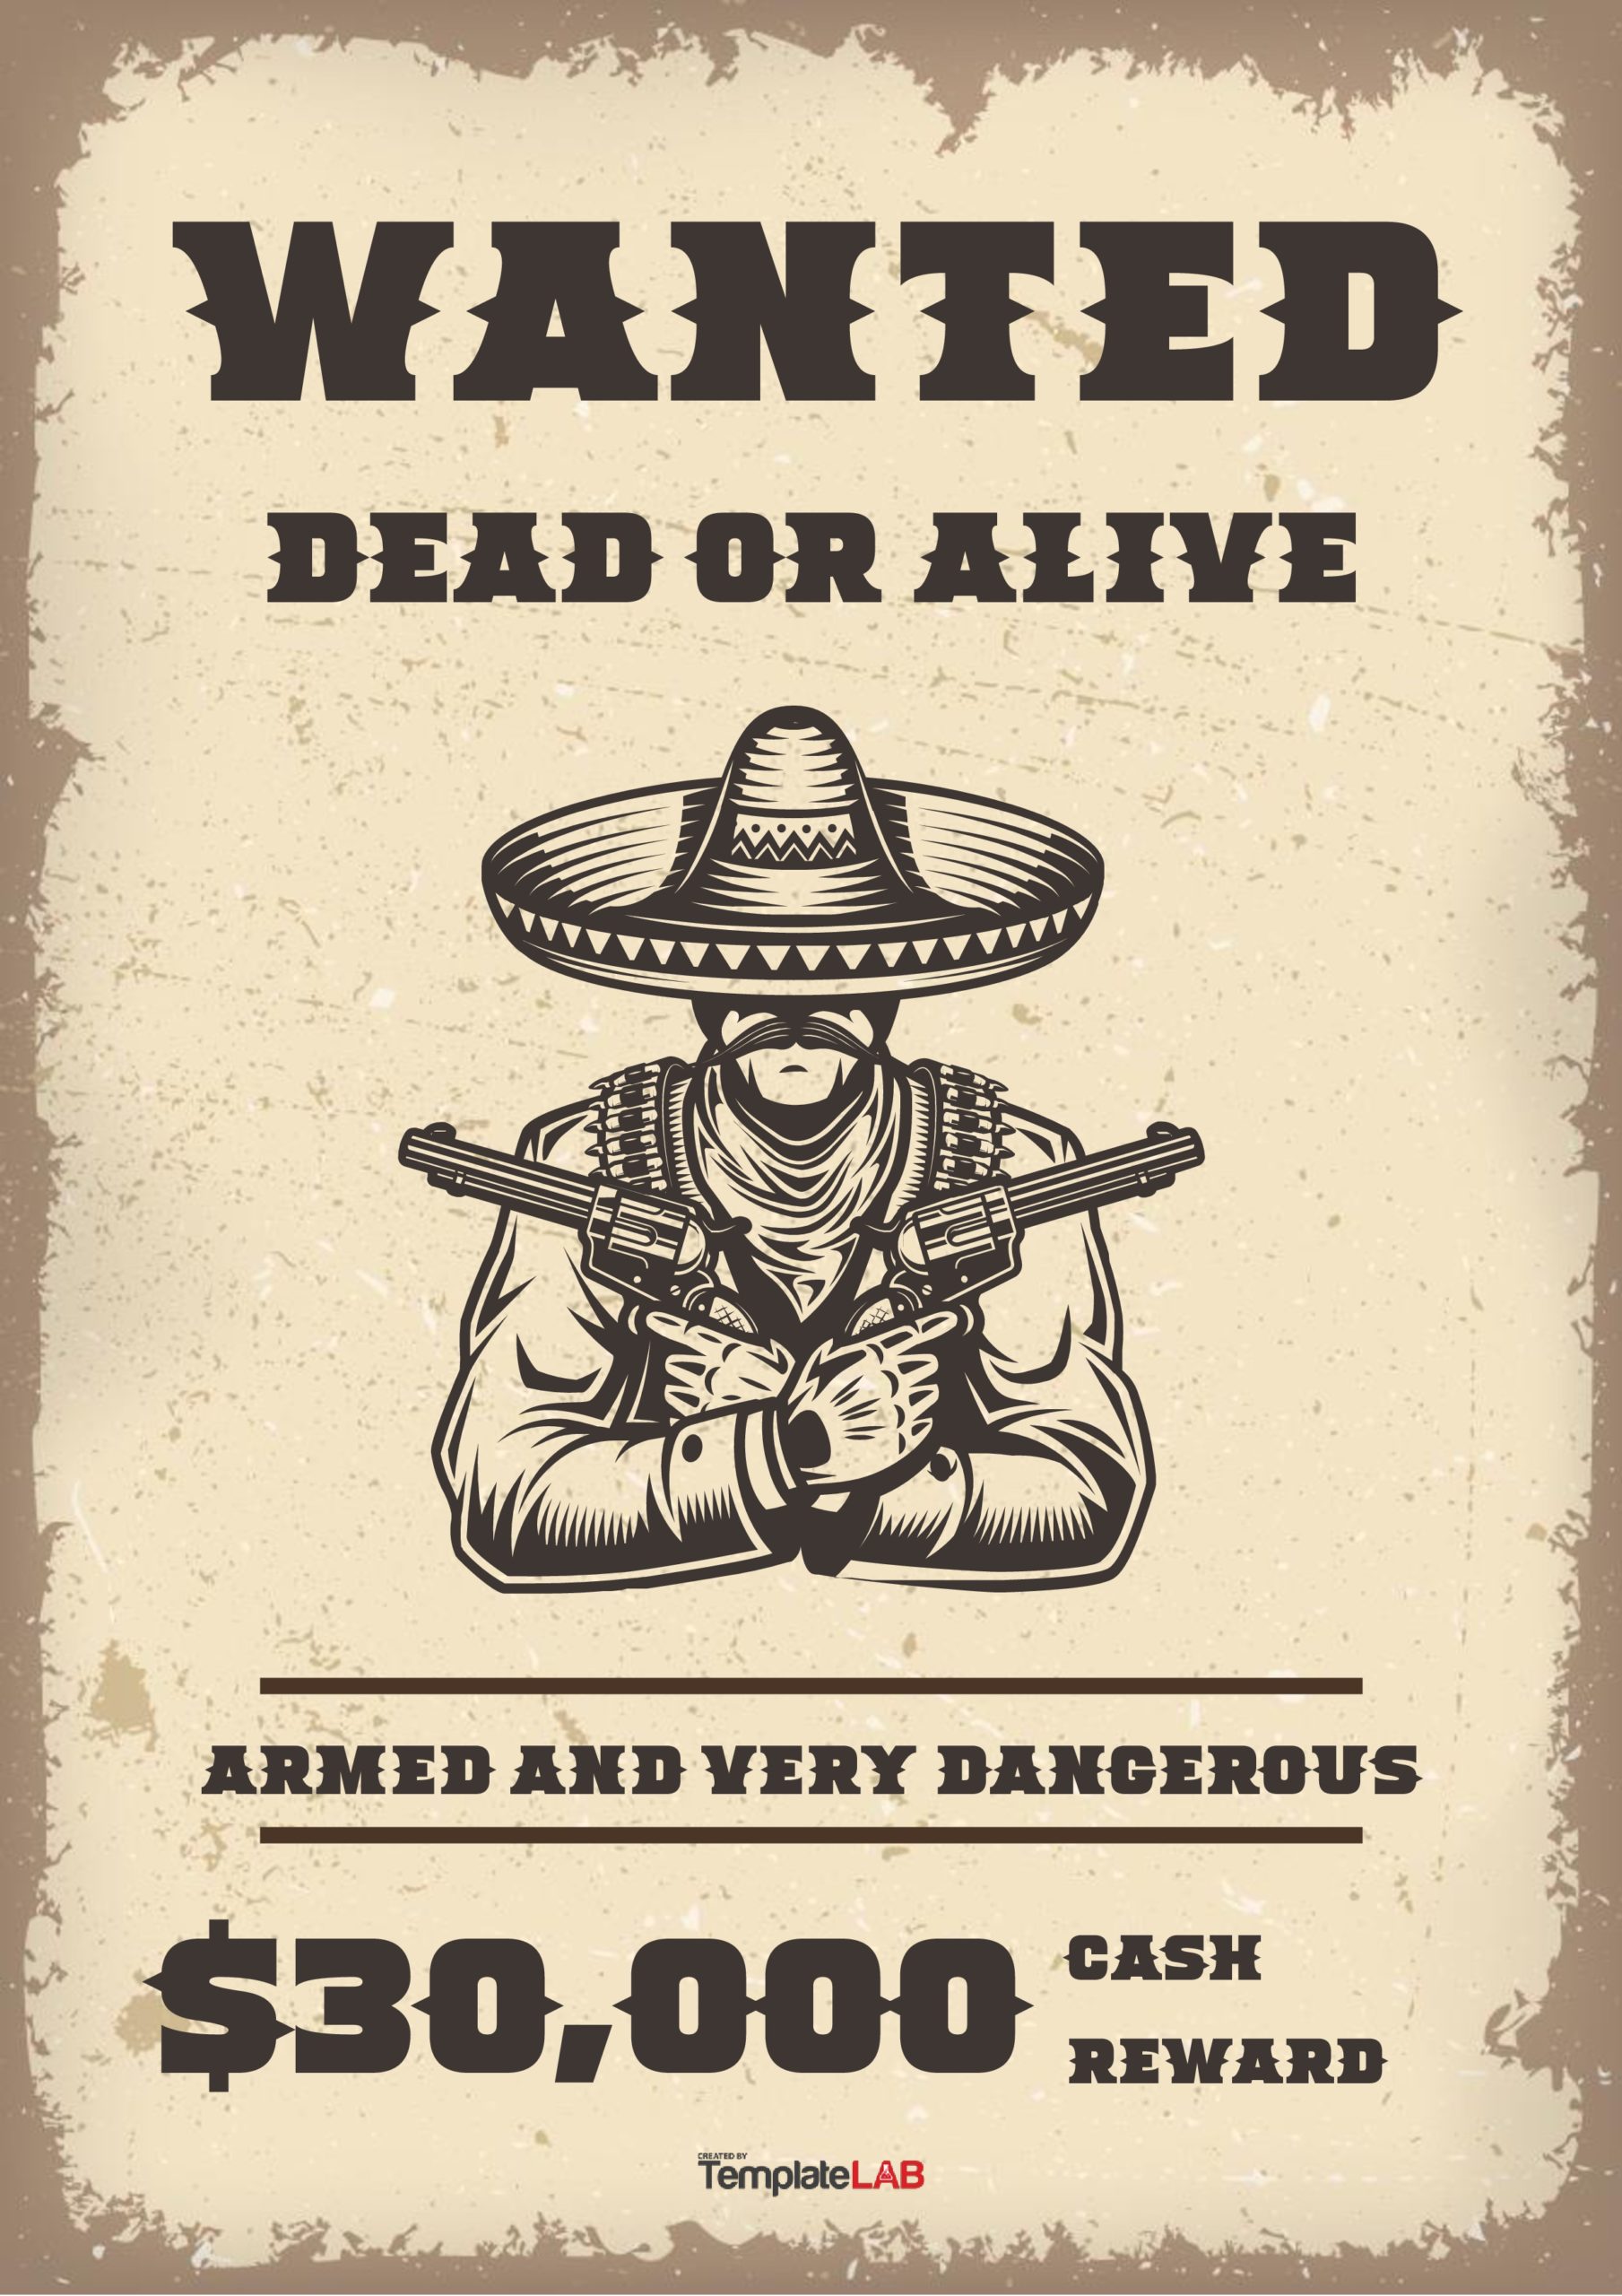 Declino Impensabile Cieco Red Dead Redemption Wanted Poster Meno Maiale Inserzionista